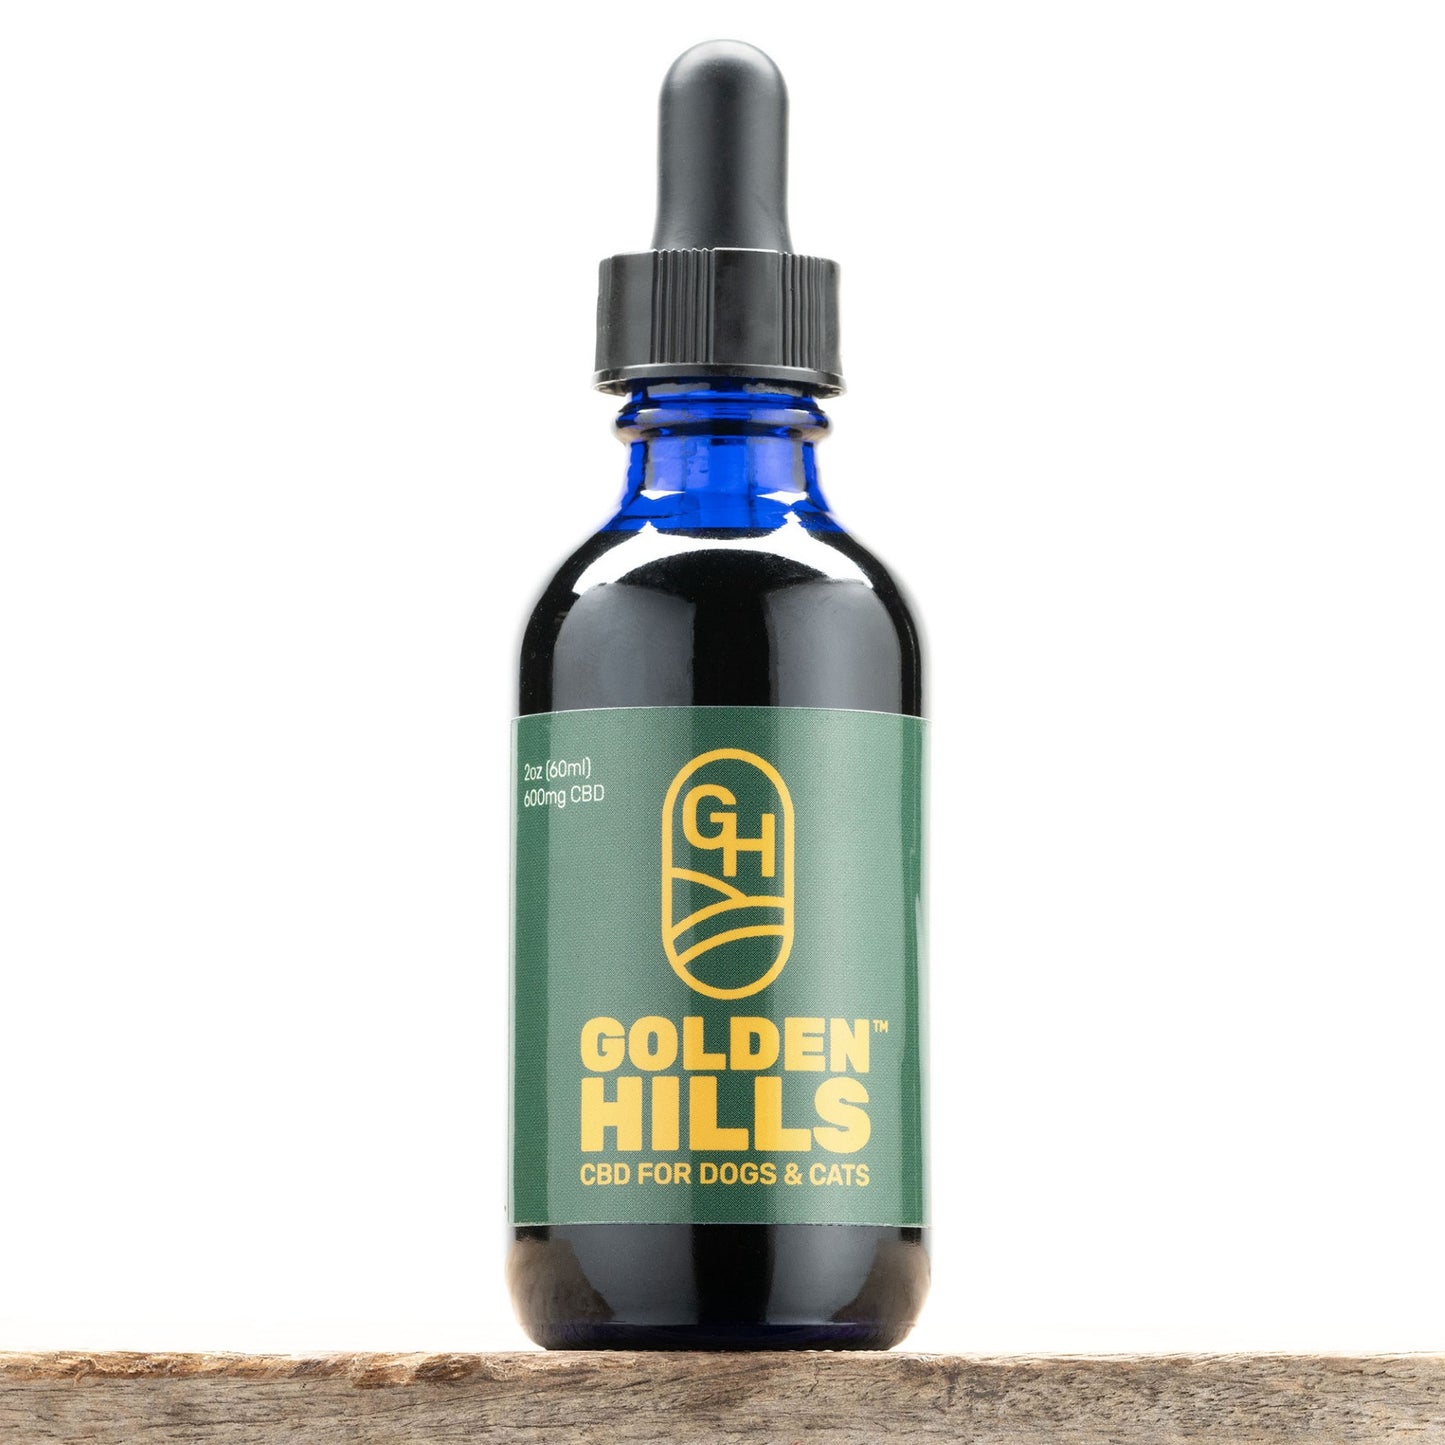 Golden Hills CBD for dogs and cats